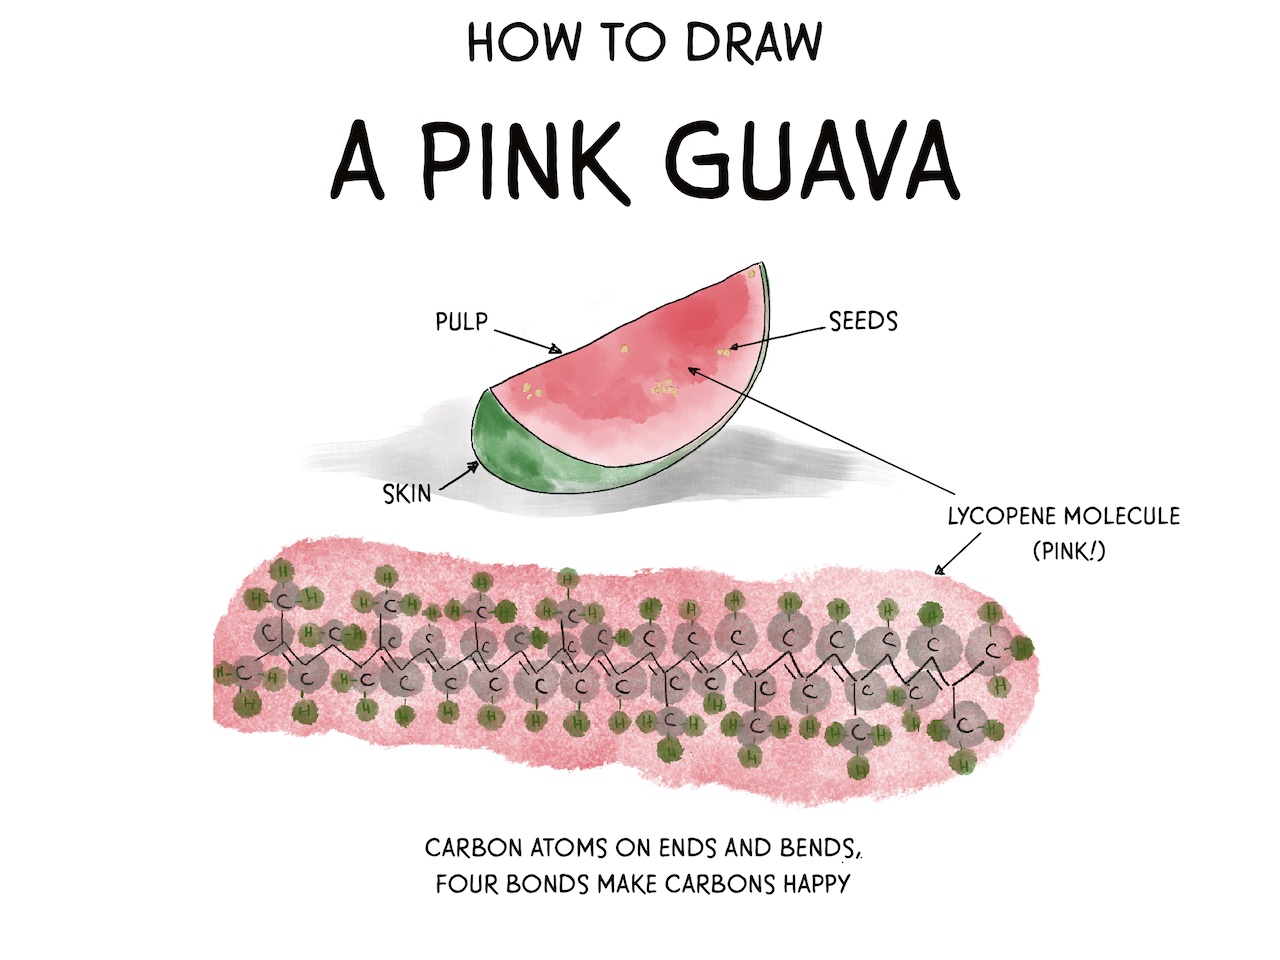 image from How to draw a pink guava